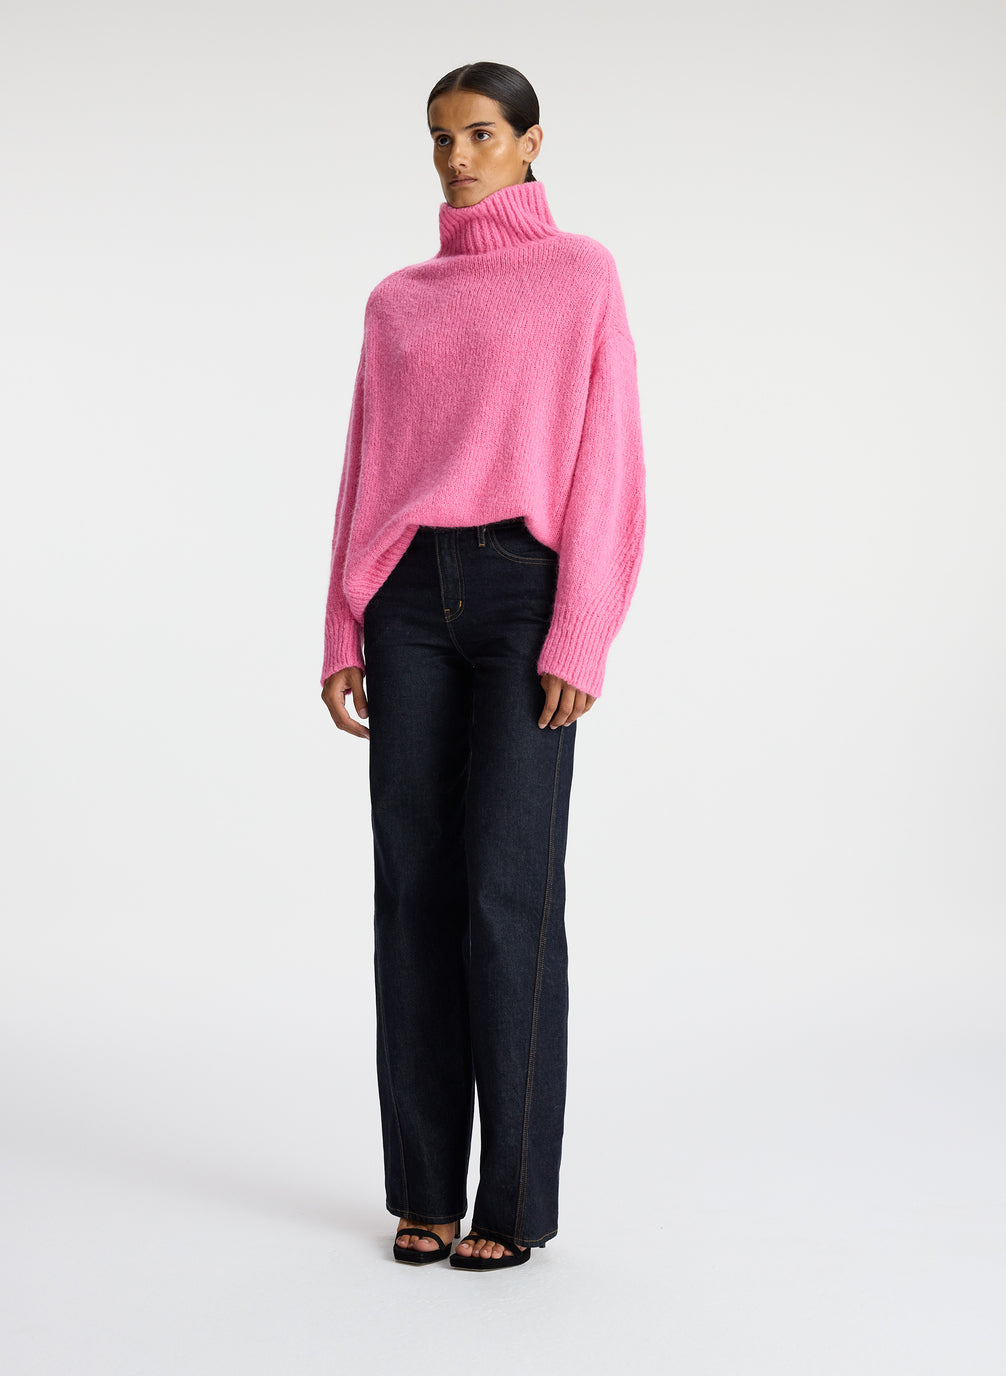 side view of woman wearing pink turtleneck sweater and dark wash denim jeans